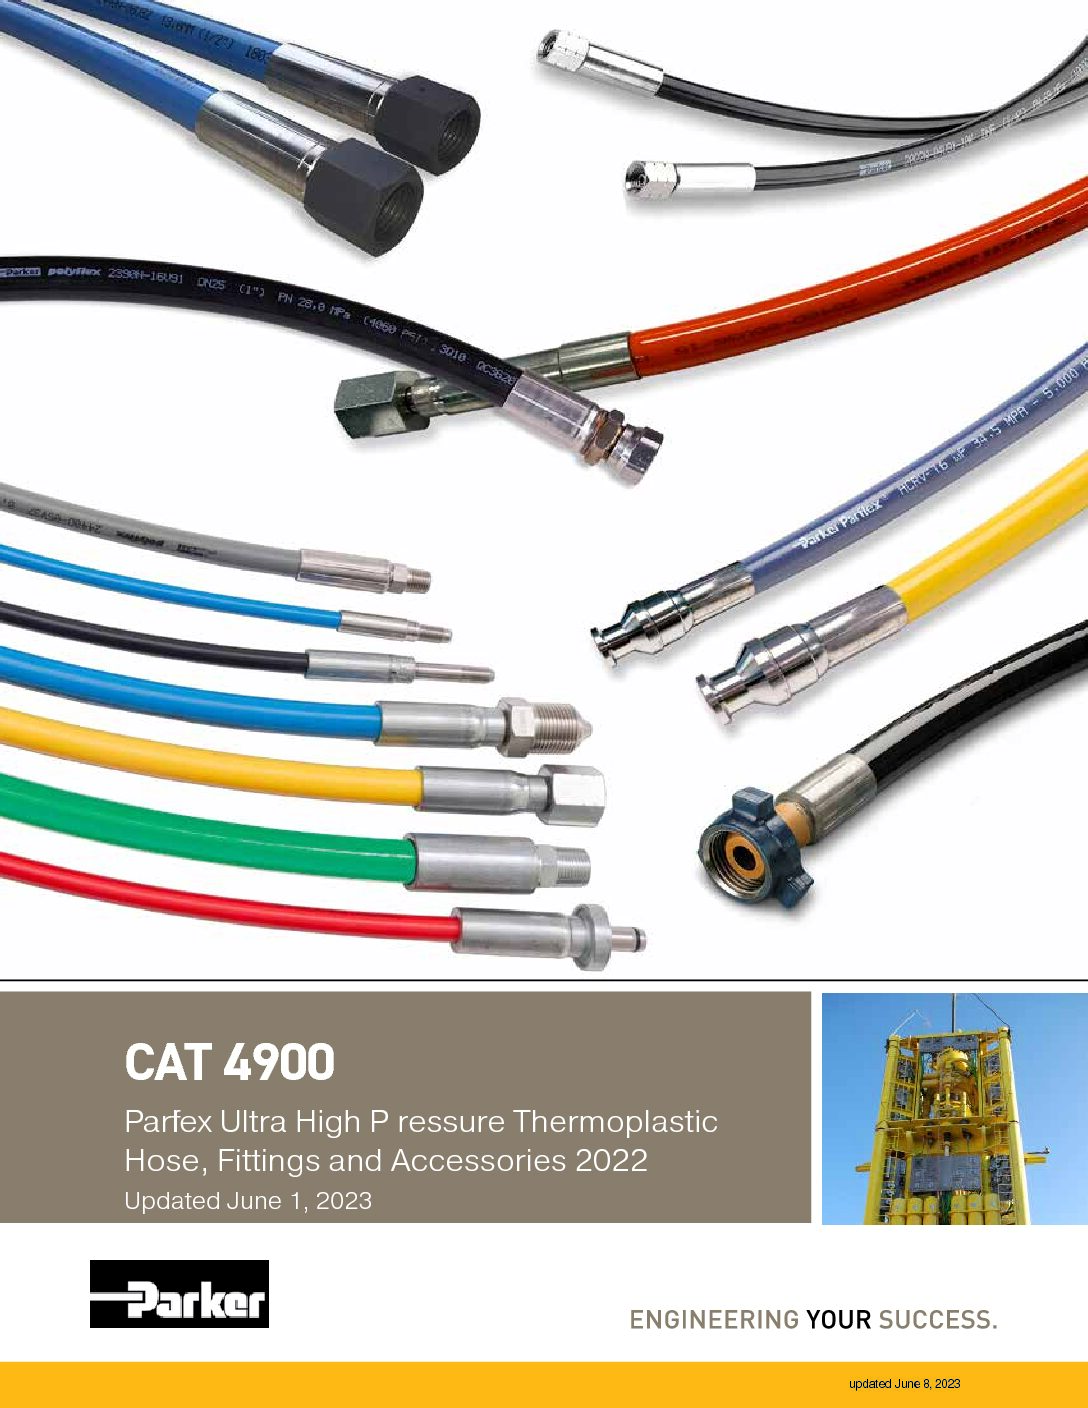 Parker Parflex Ultra High Pressure Thermoplastic Hose, Fittings, and Accessories CAT 4900